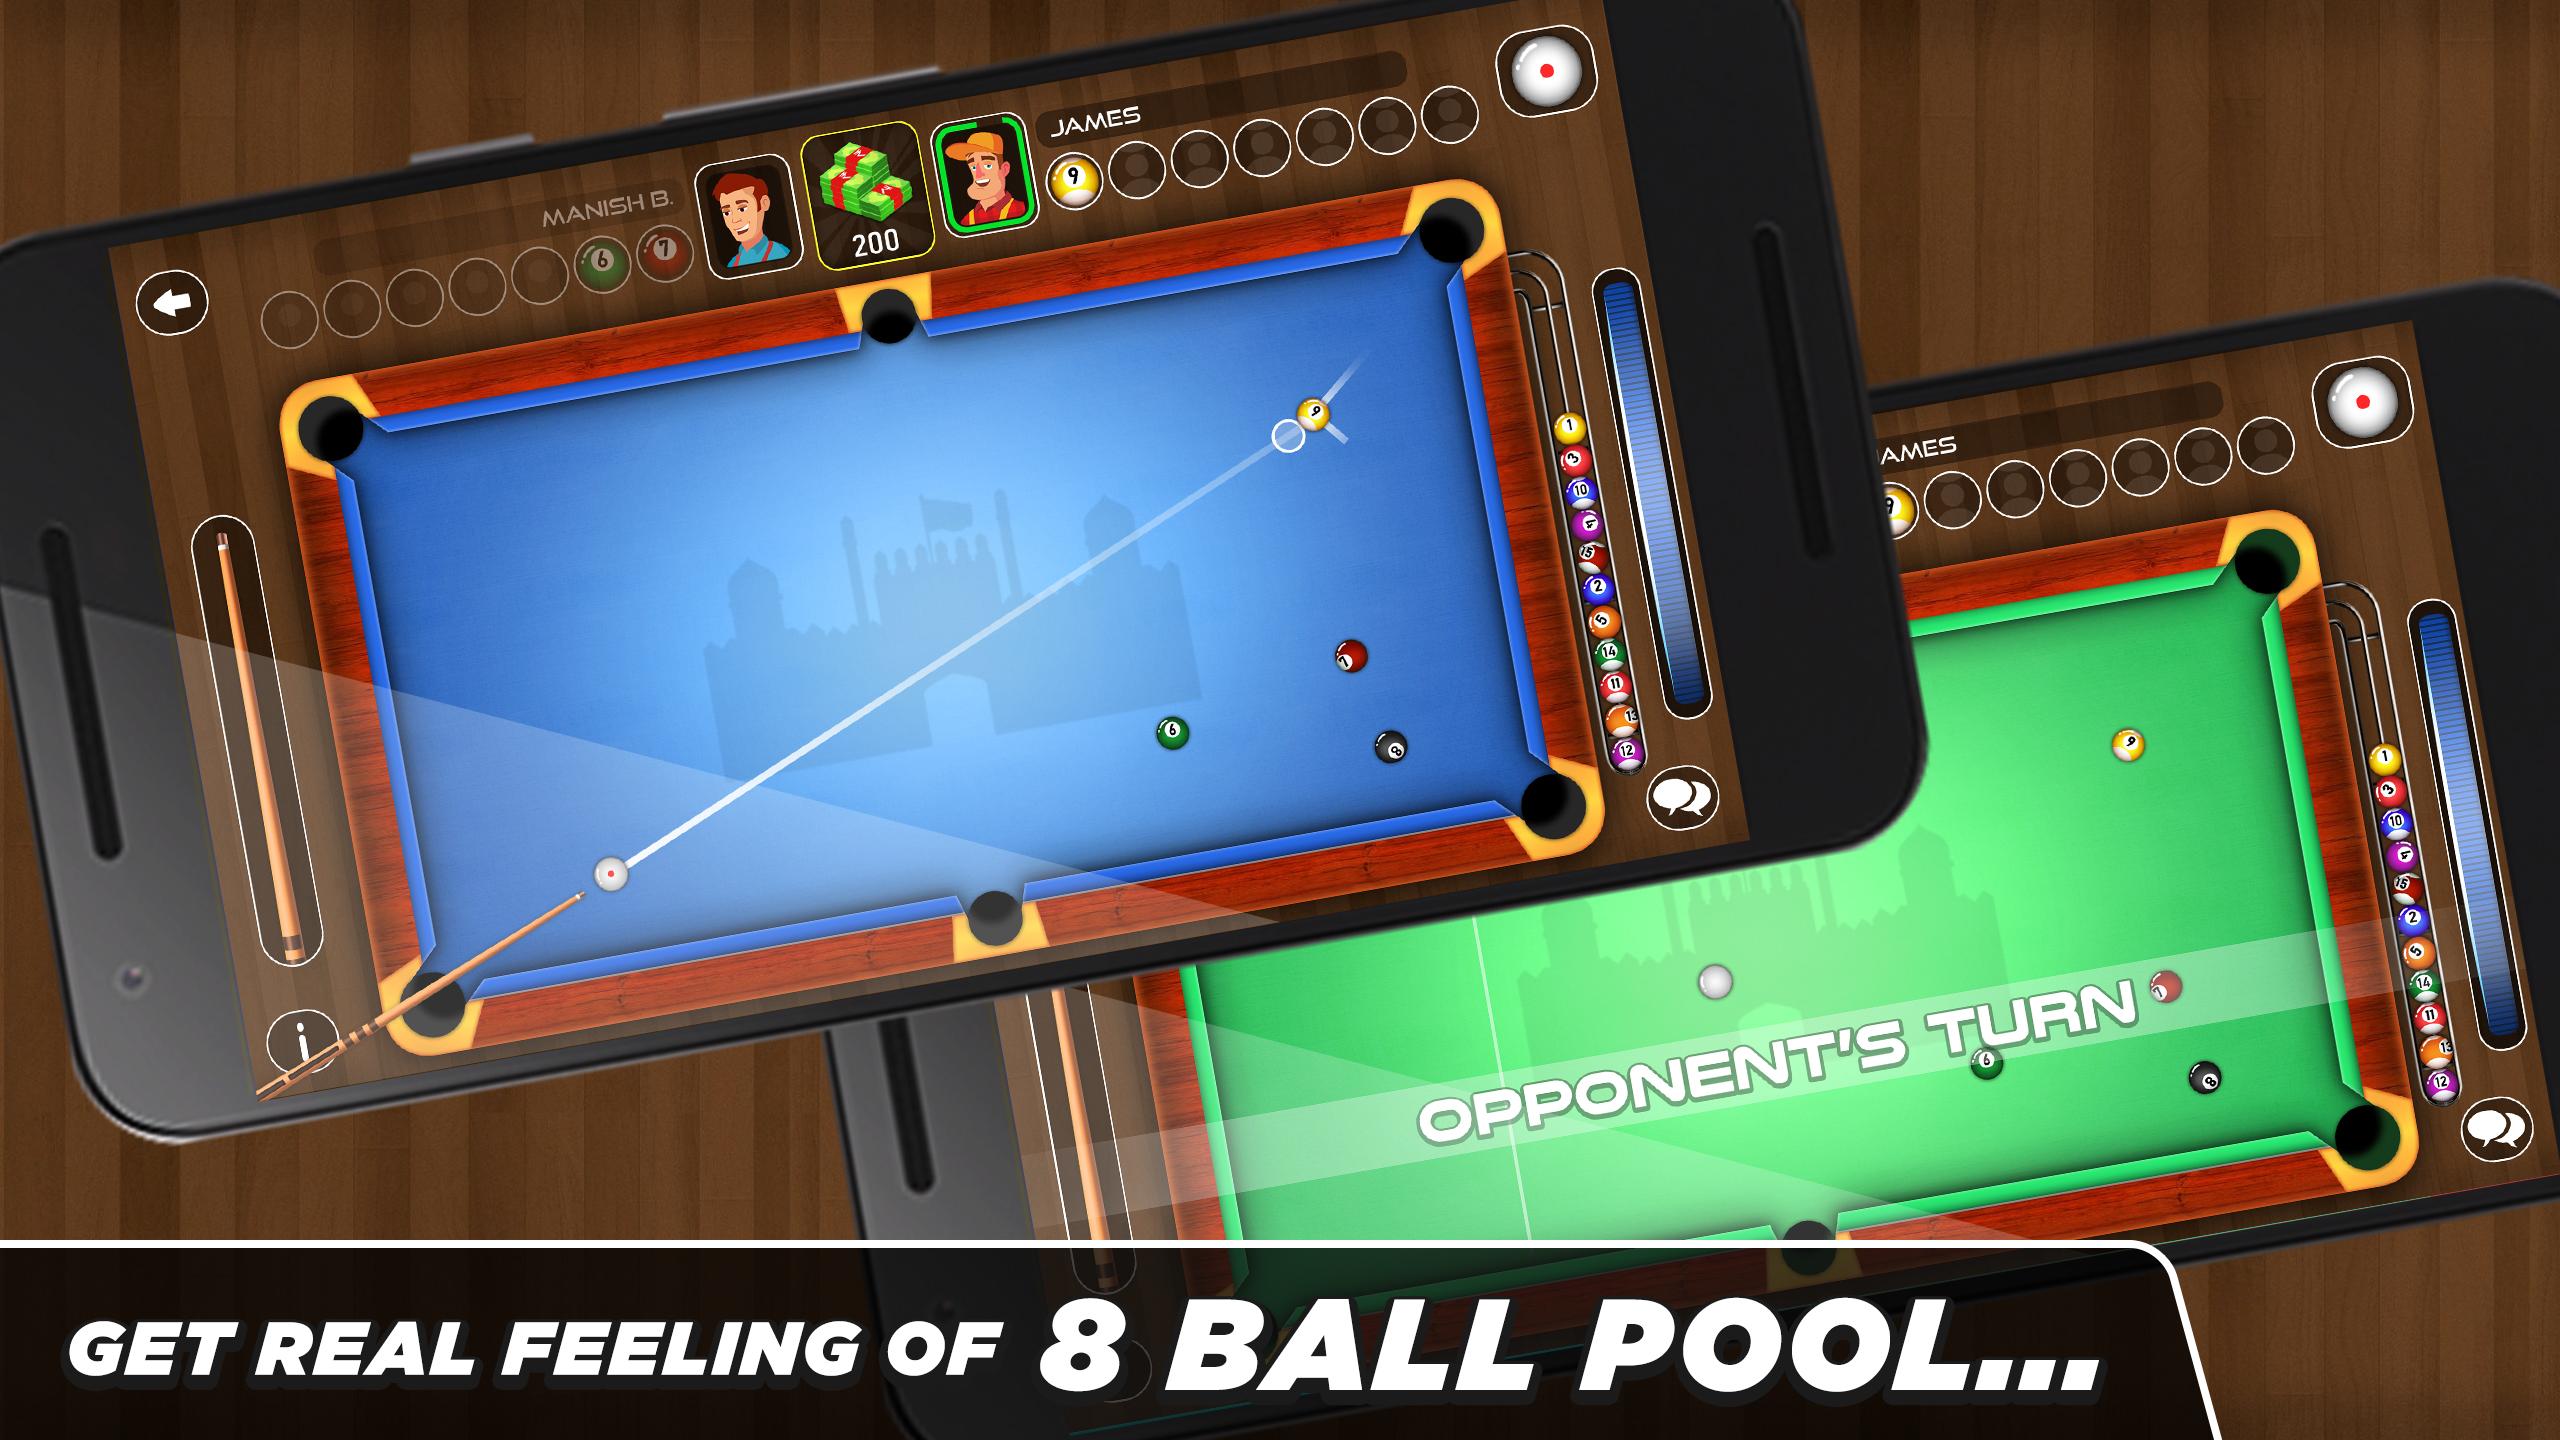 Real 8 Ball Pool for Android - APK Download - 